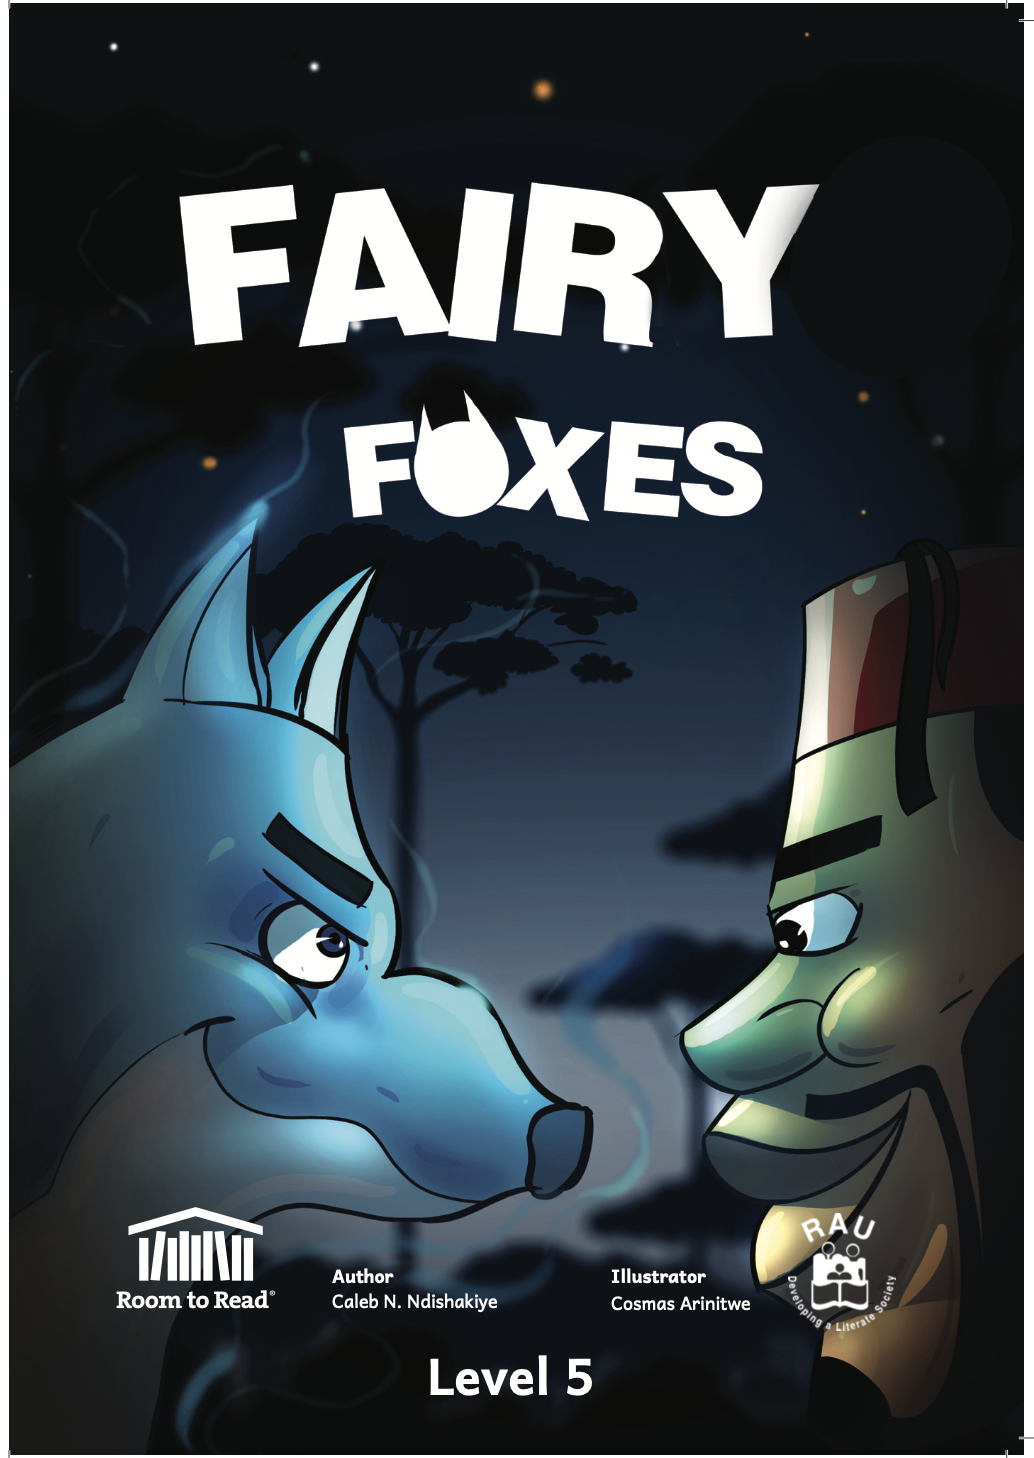 The Fairy Foxes